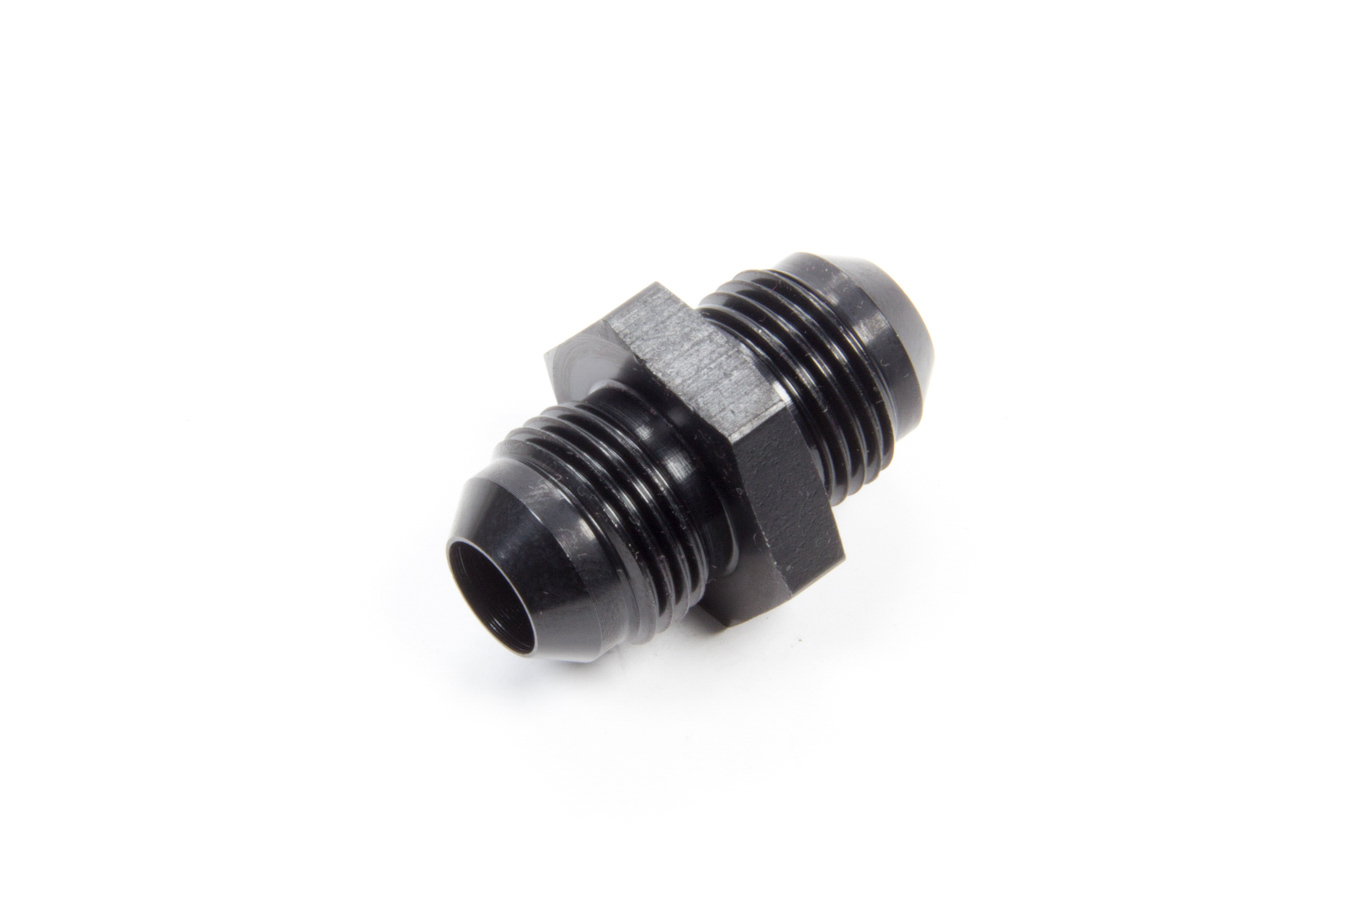 Aeroquip FCM5053 Fitting, Adapter, Straight, 8 AN Male to 8 AN Male, Aluminum, Black Anodized, Each